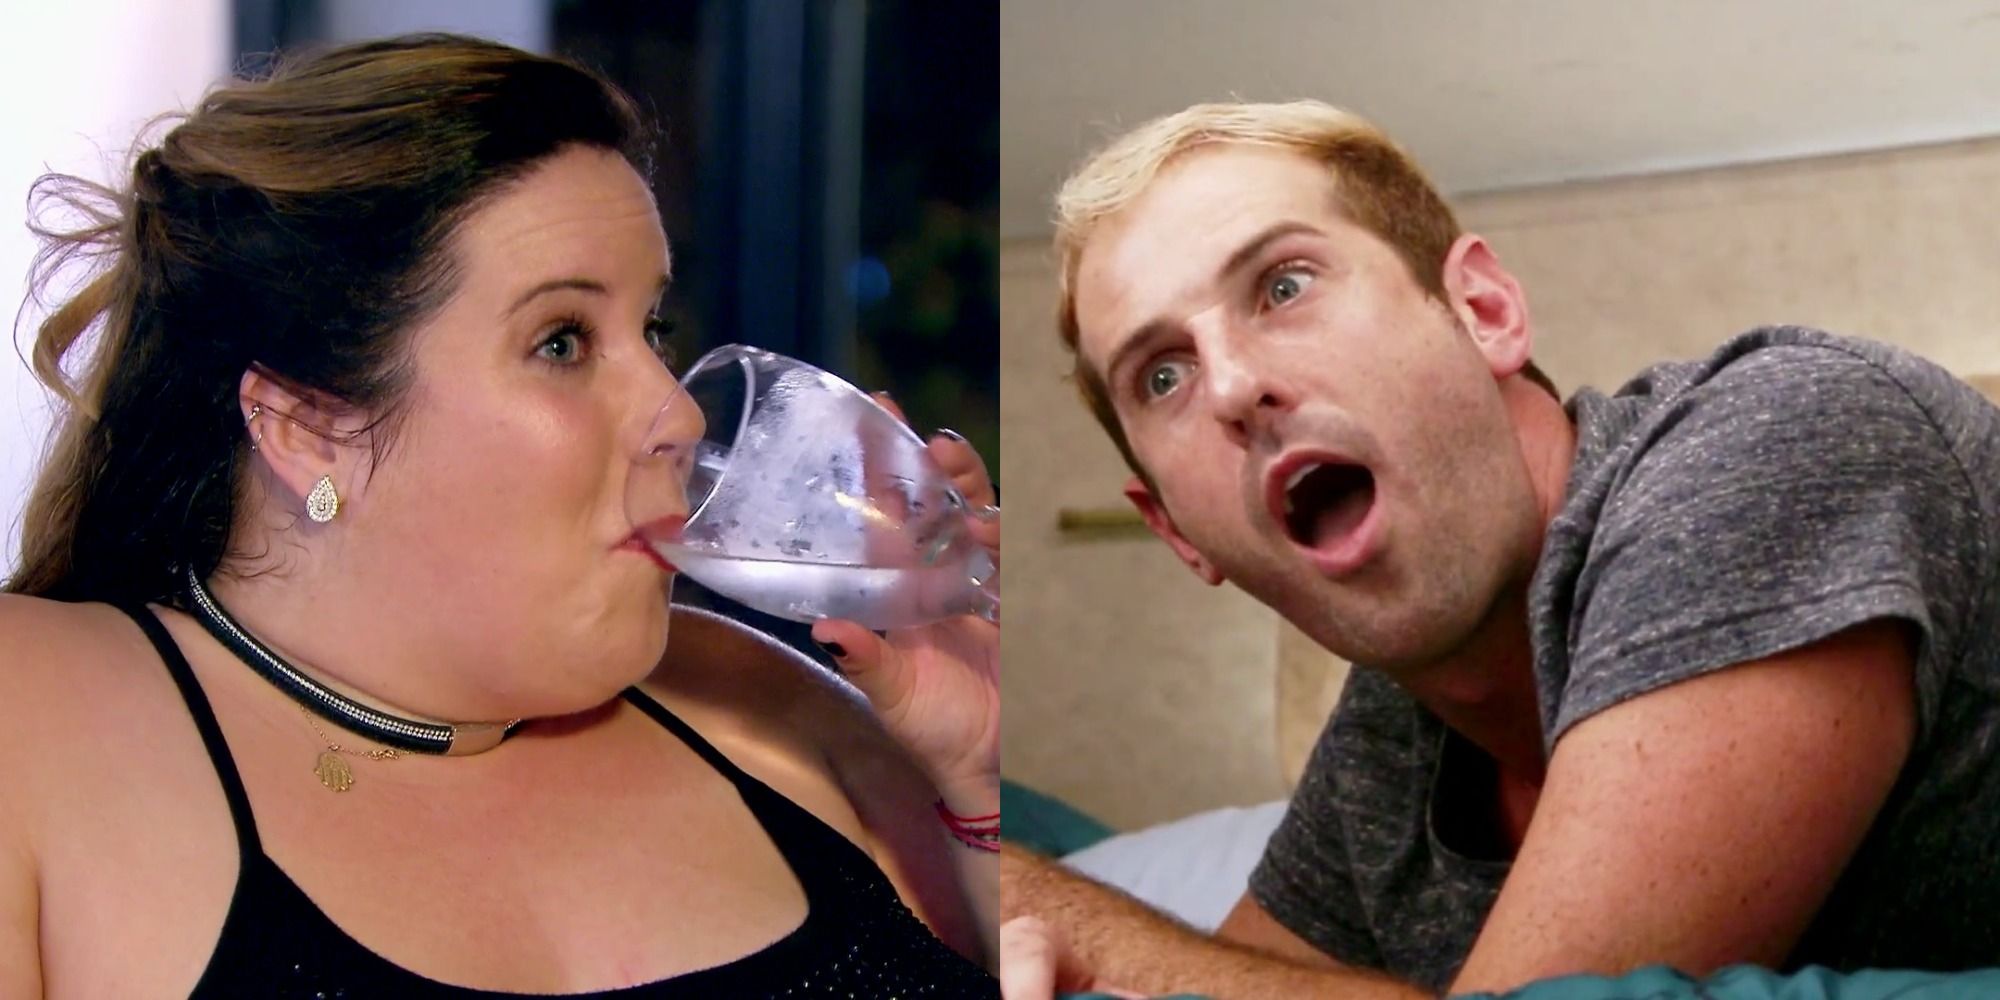 Two side by side images of contestants on My Big Fat Fabulous Life